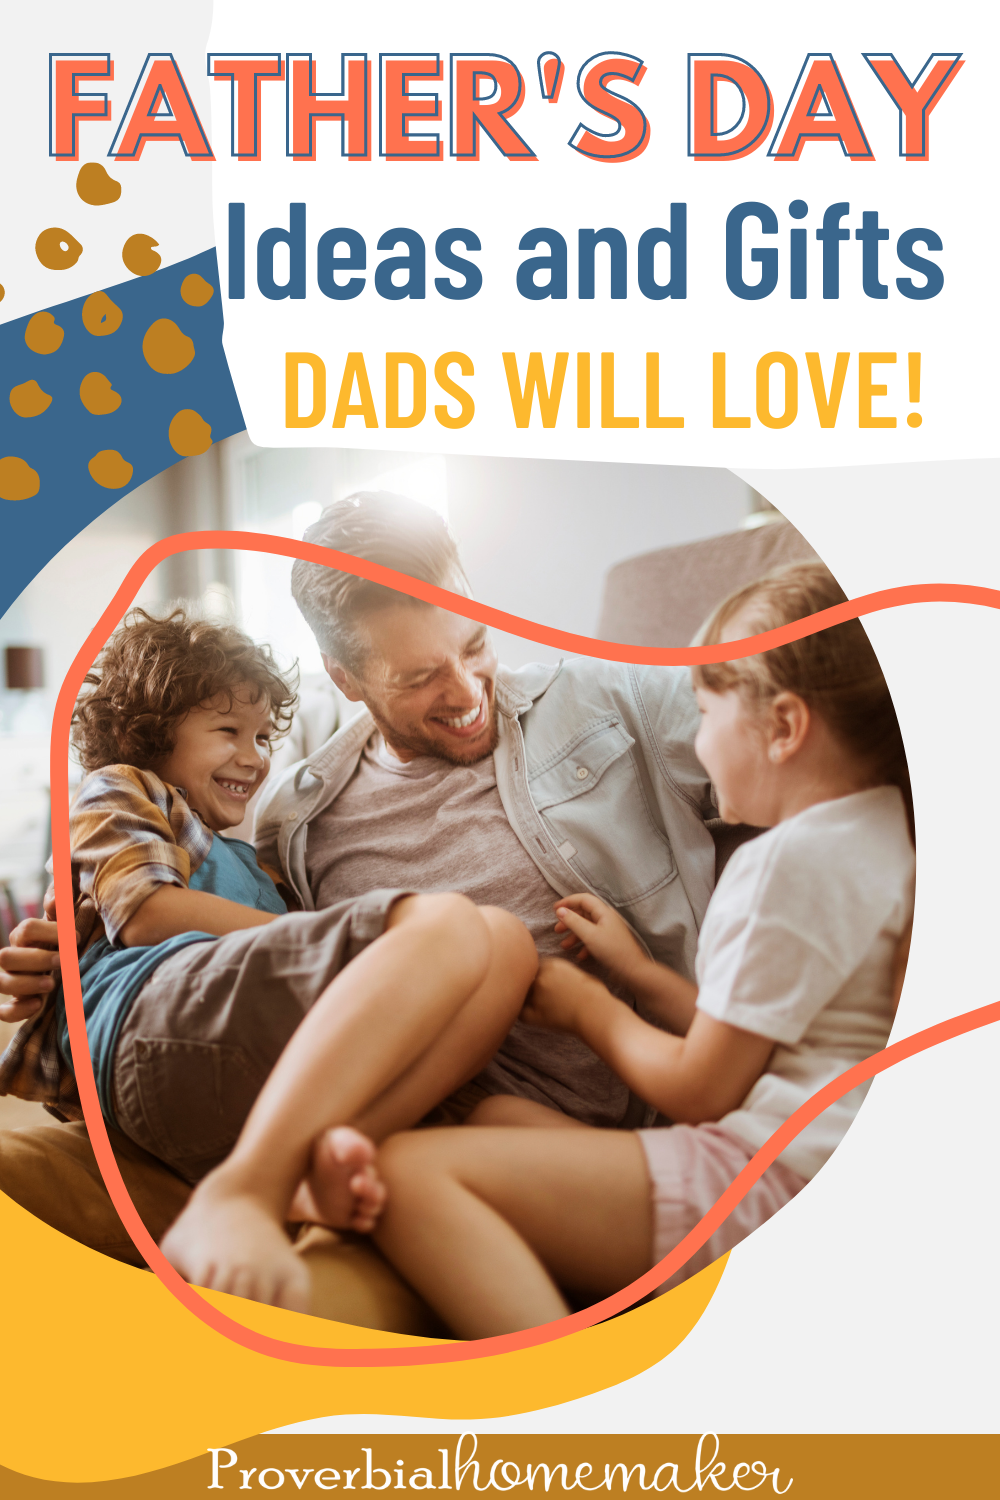 Father's Day ideas your husband will love - activities, date nights, kids' crafts, gift ideas, and more.